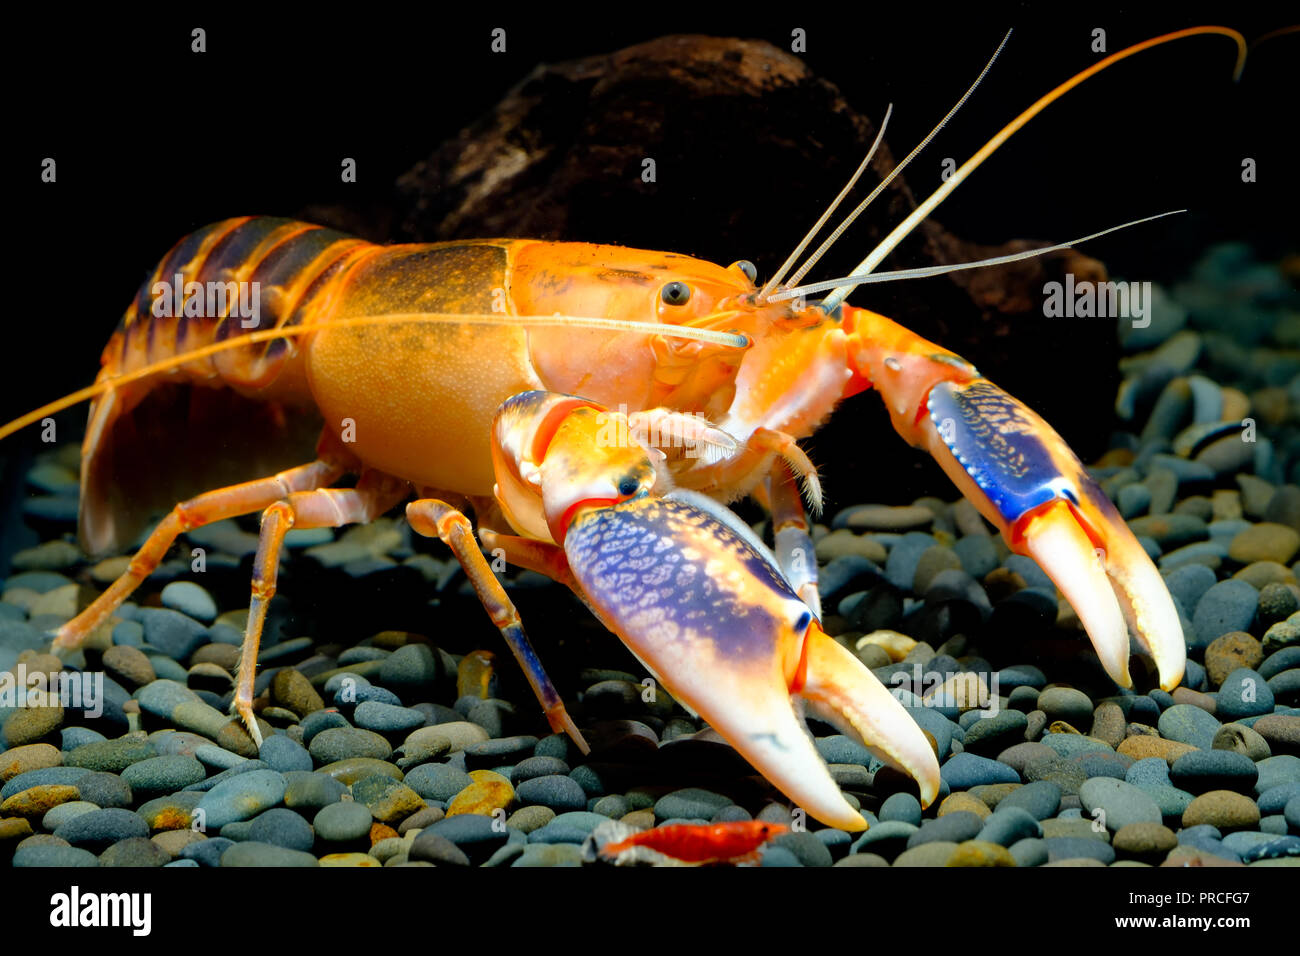 Volcano Destructor, a new breed of crayfish developed by Thai people Stock Photo